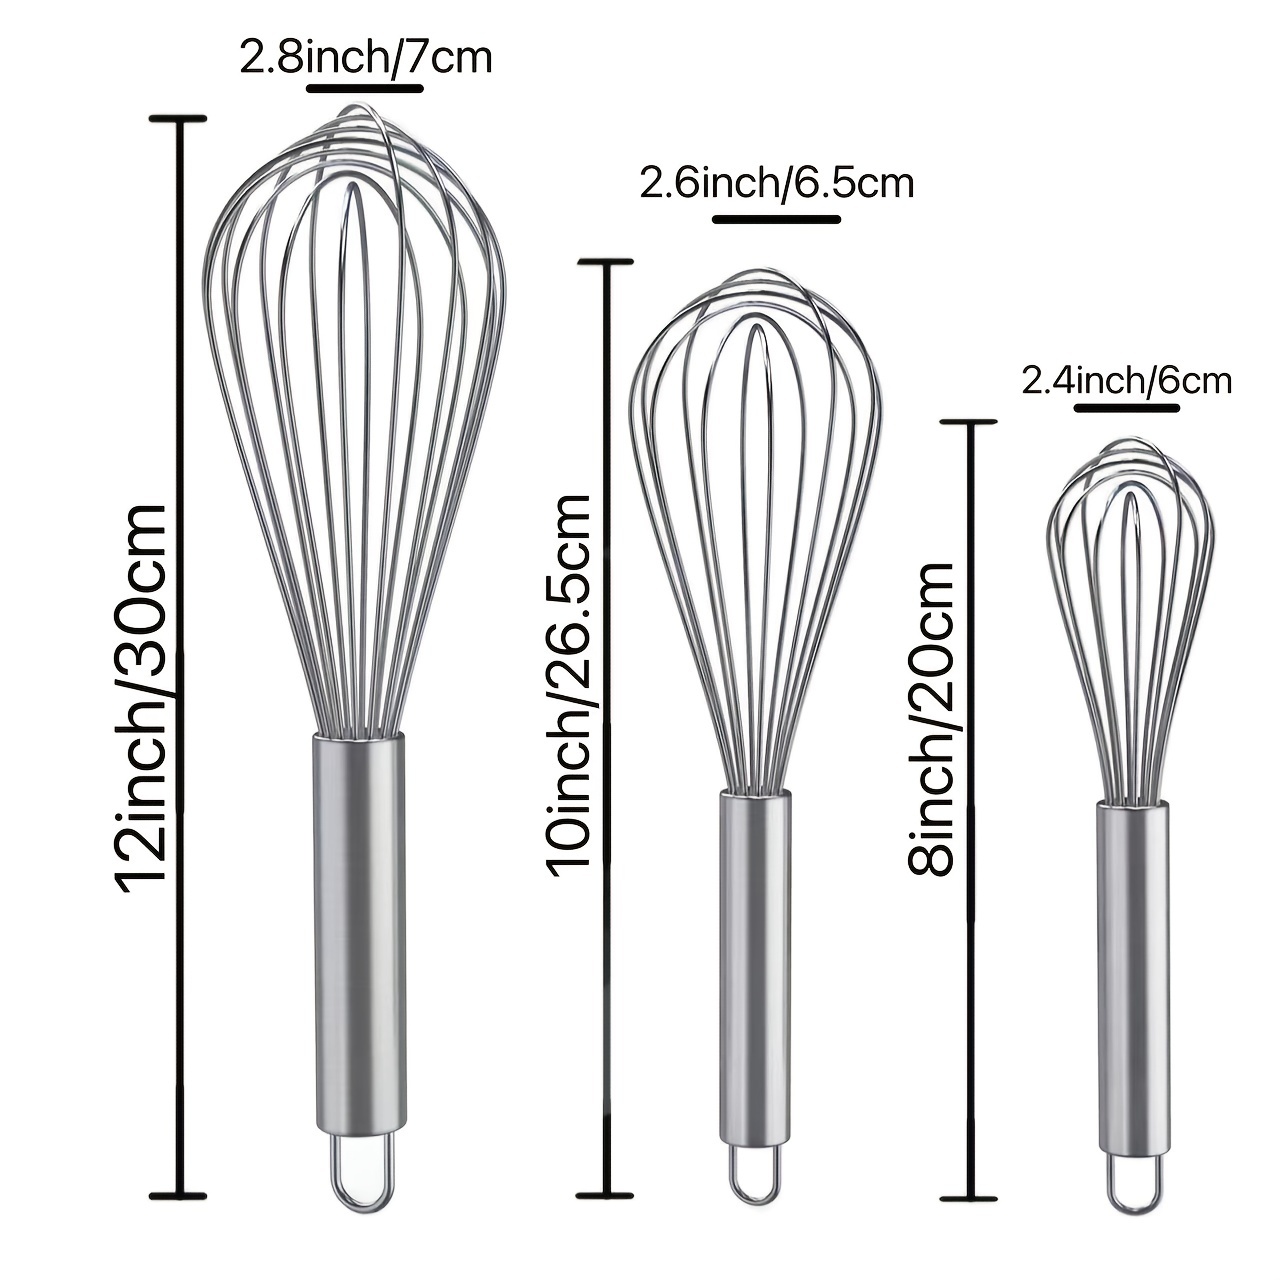  Misen Stainless Steel Whisk with Silicone Handle - Large  Balloon Whisks for Cooking - Metal Whisk for Stirring & Mixing, Black: Home  & Kitchen